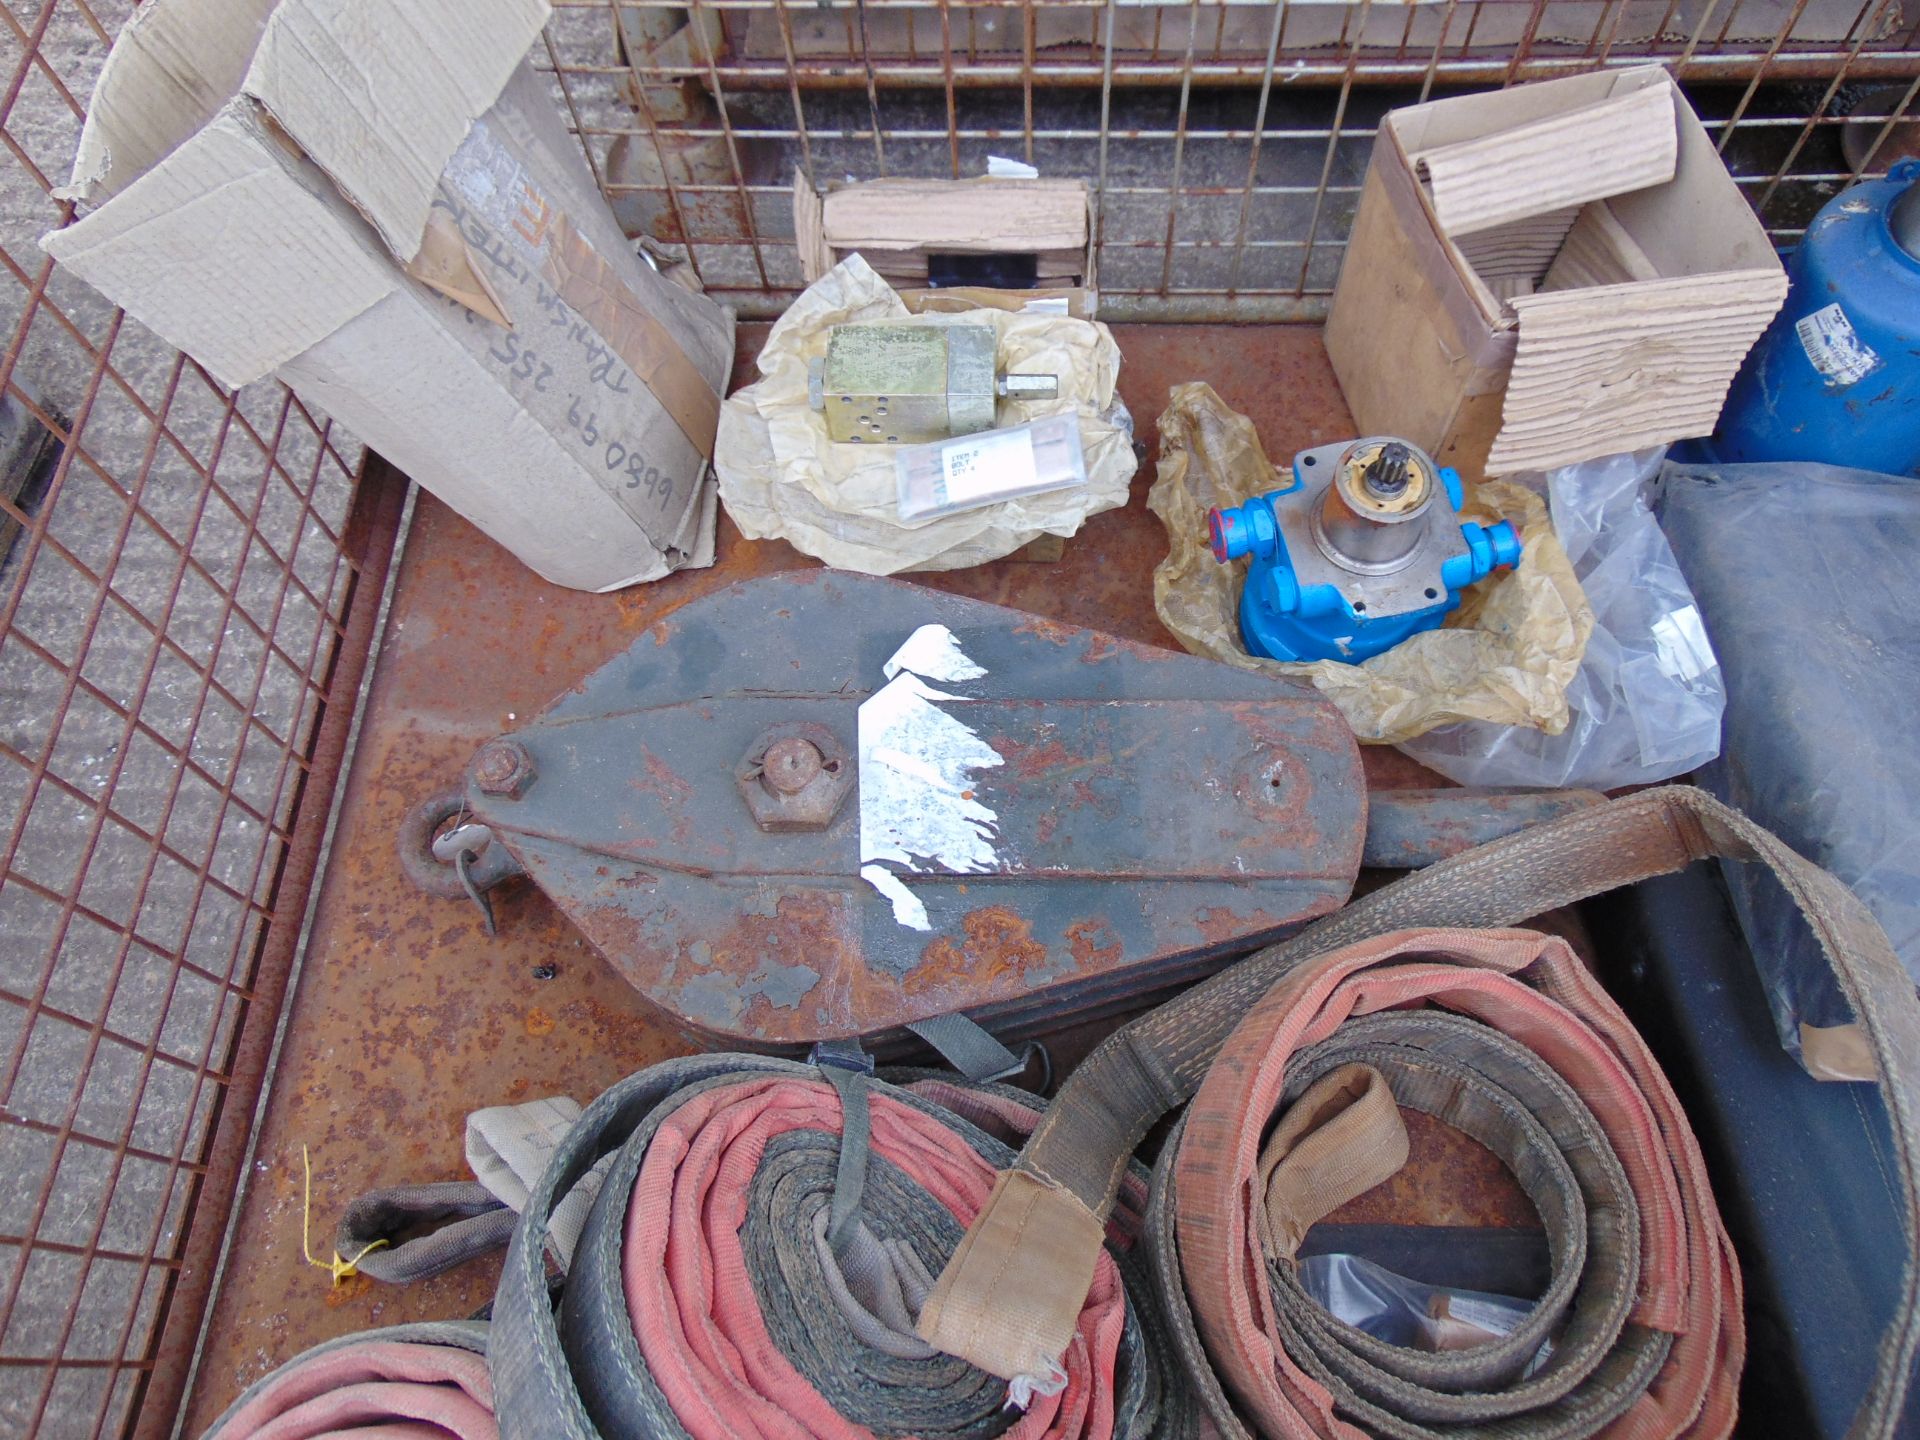 1 x Stillage Land Rover Tow Strops, Hydraulic Pump Recovery Snatch Block Etc - Image 8 of 9